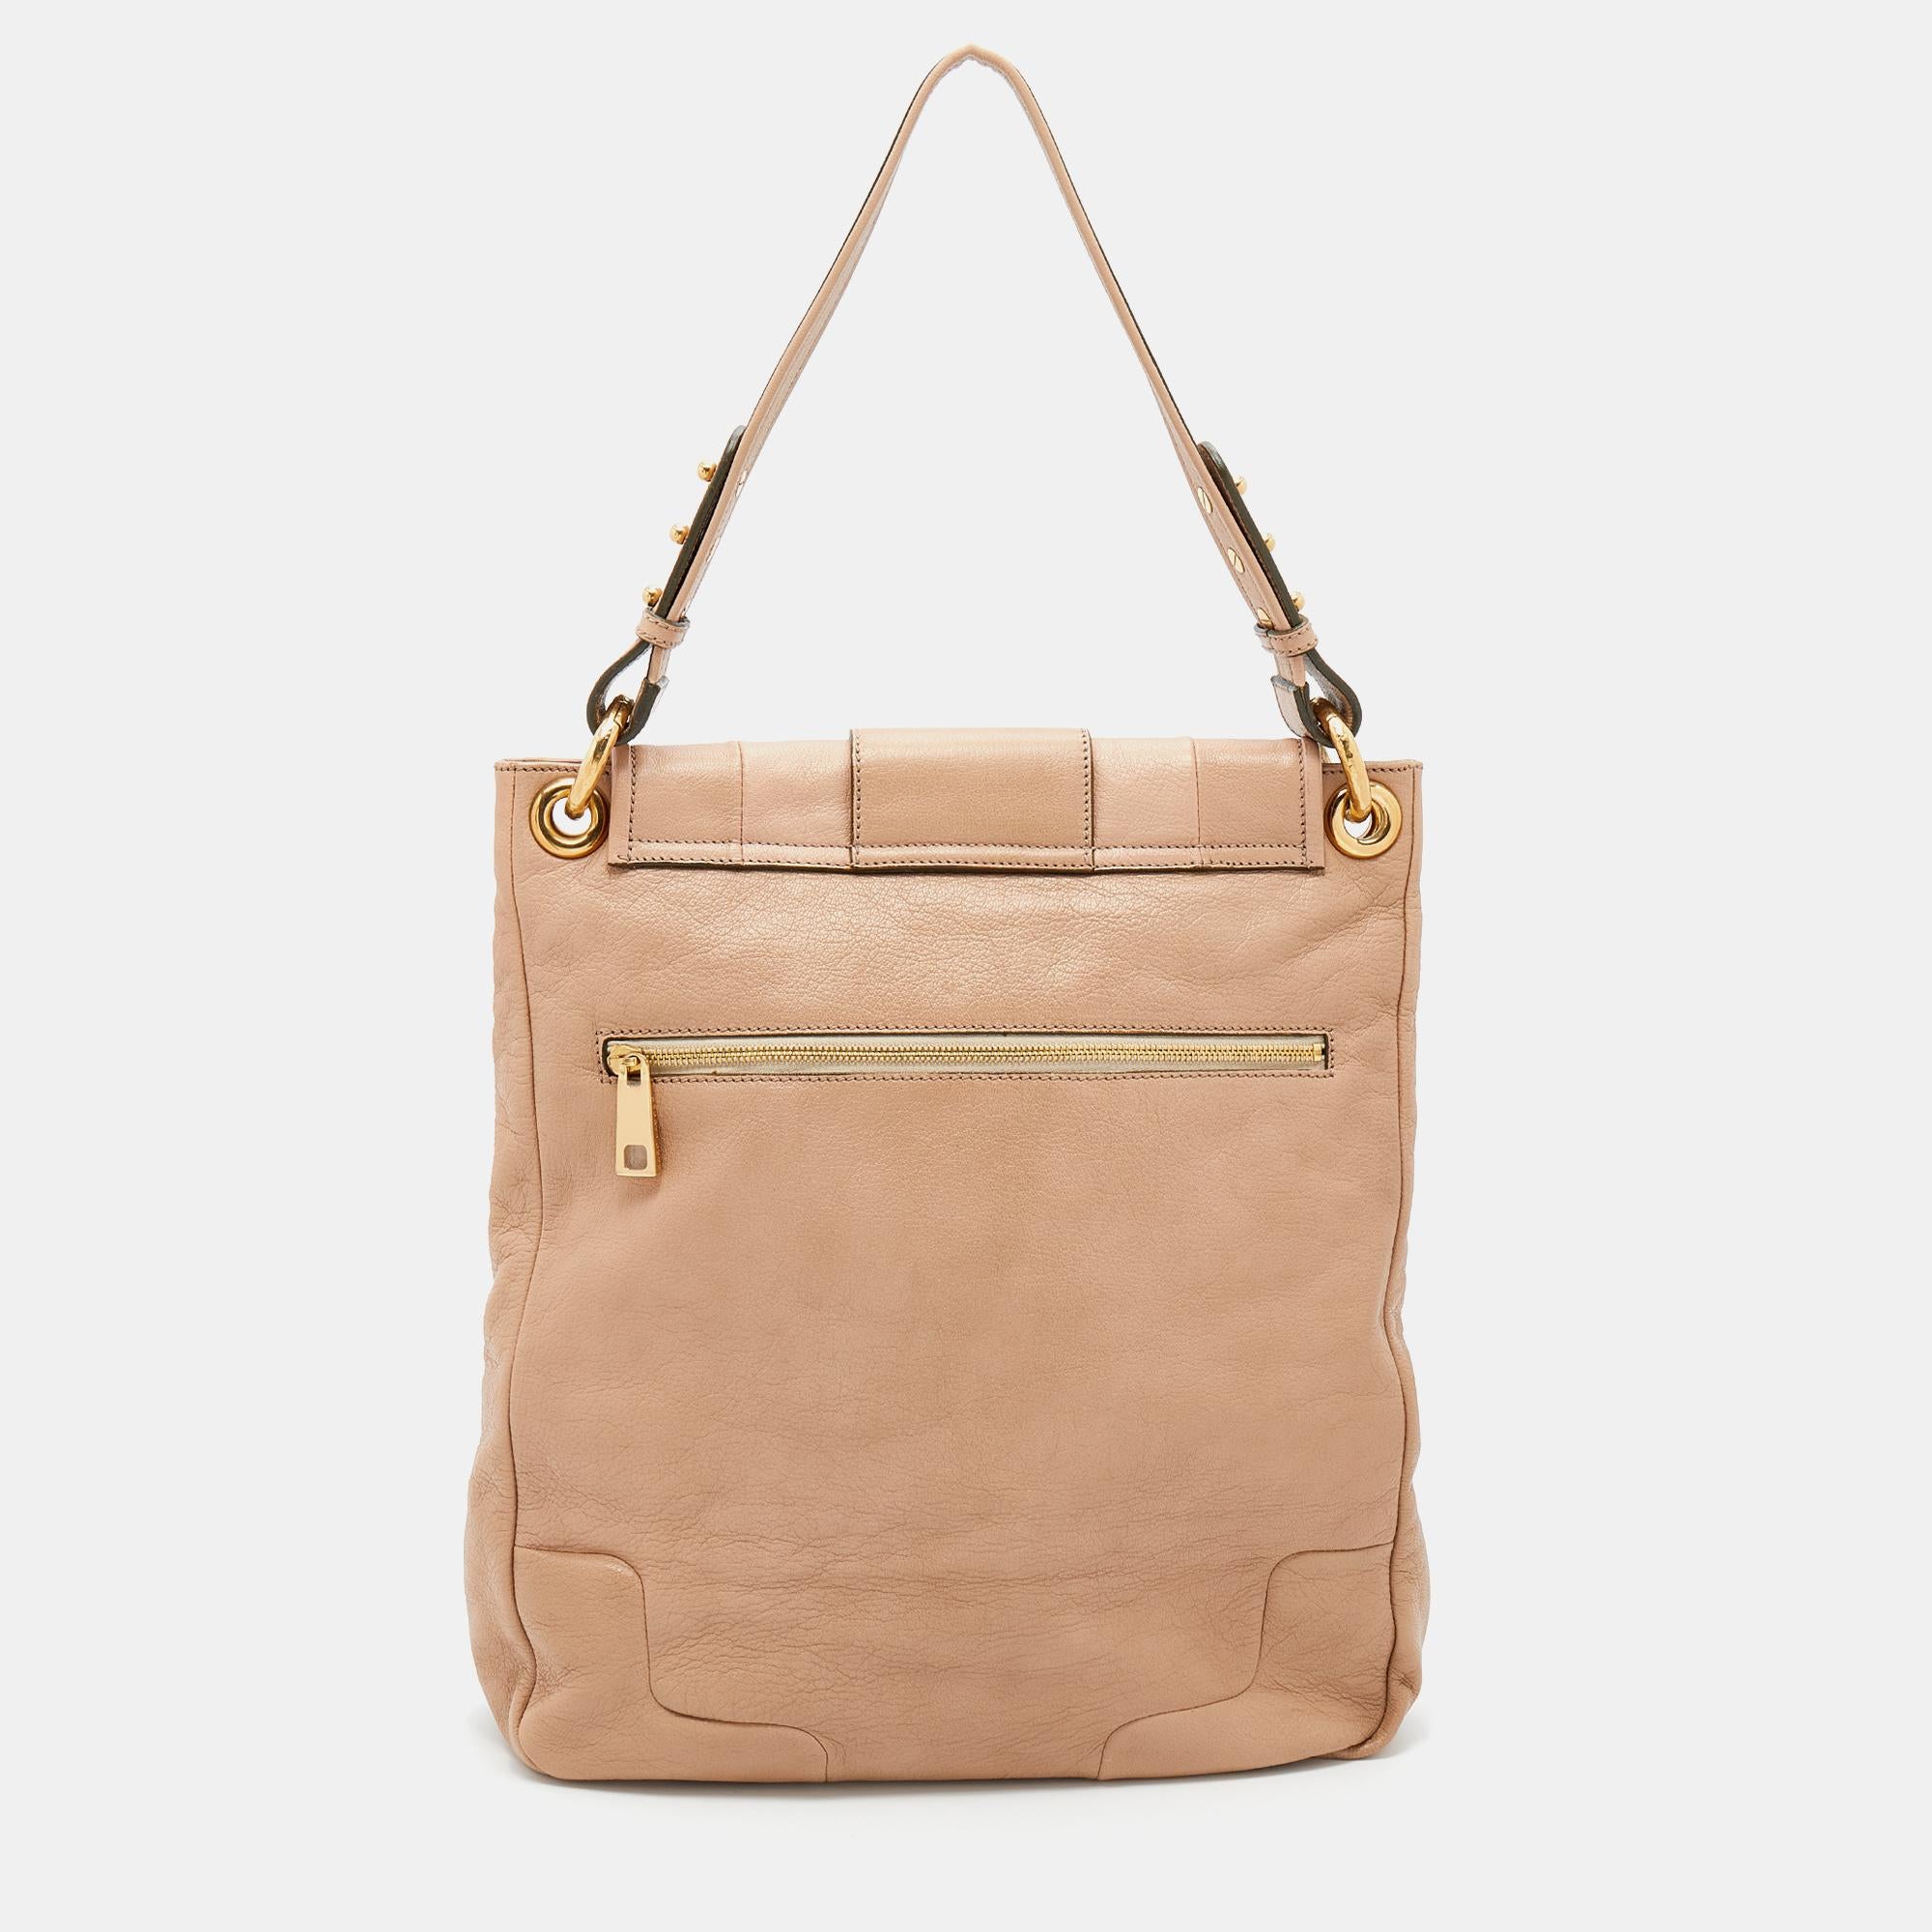 Make space in your closet for this gorgeous beige bag from Marc Jacobs. It is made from leather and comes with a stone-embellished front flap, gold-tone hardware, a shoulder strap, and a well-sized interior that can house your belongings with ease.